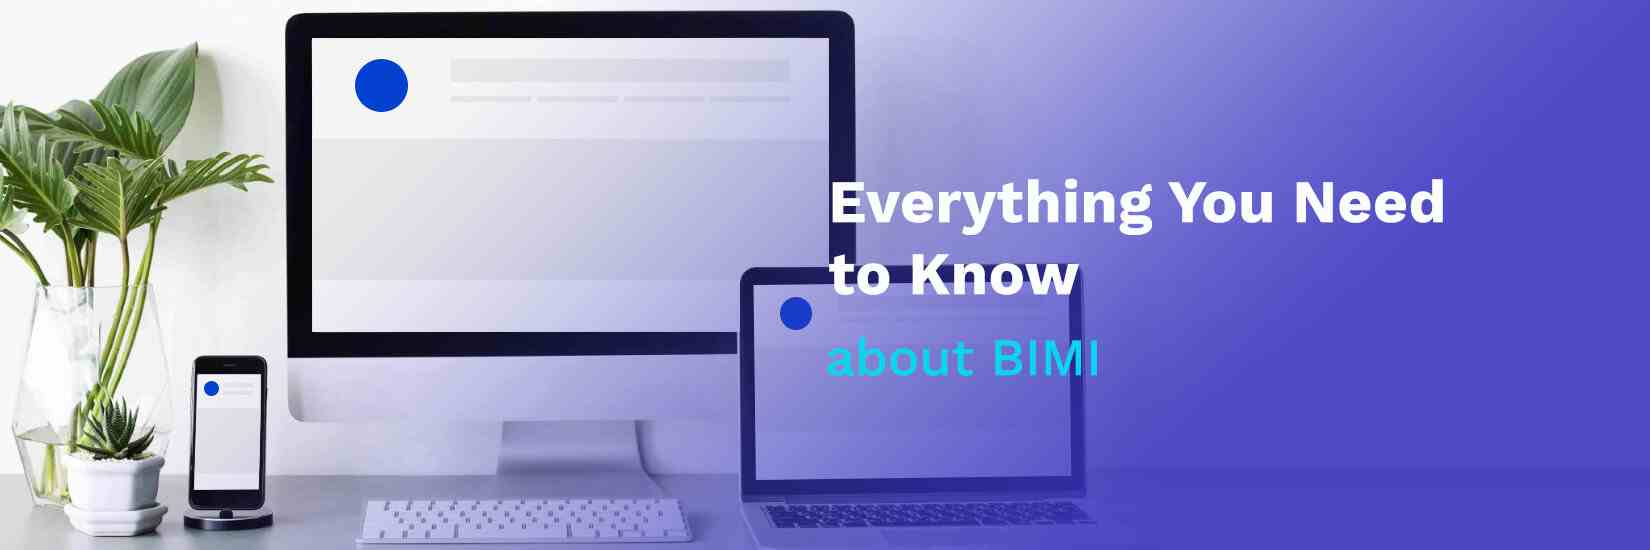 How to Use BIMI to Increase Your Brand Recognition & Deliverability